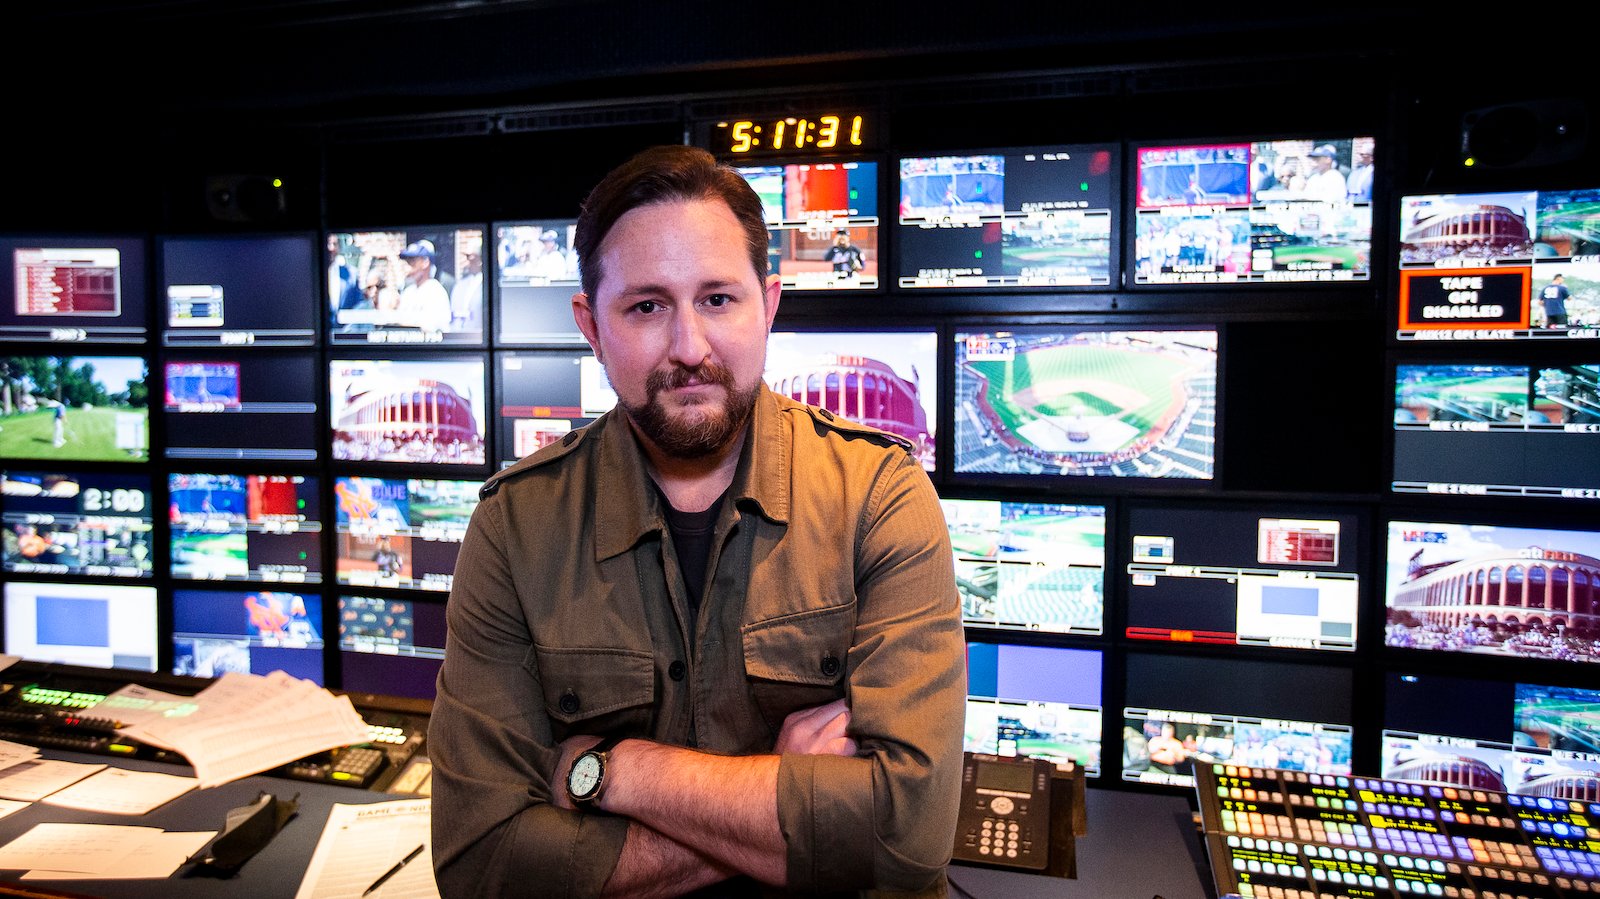 A man with a goatee stands with arms folded before a live baseball TV control room, looking at camera